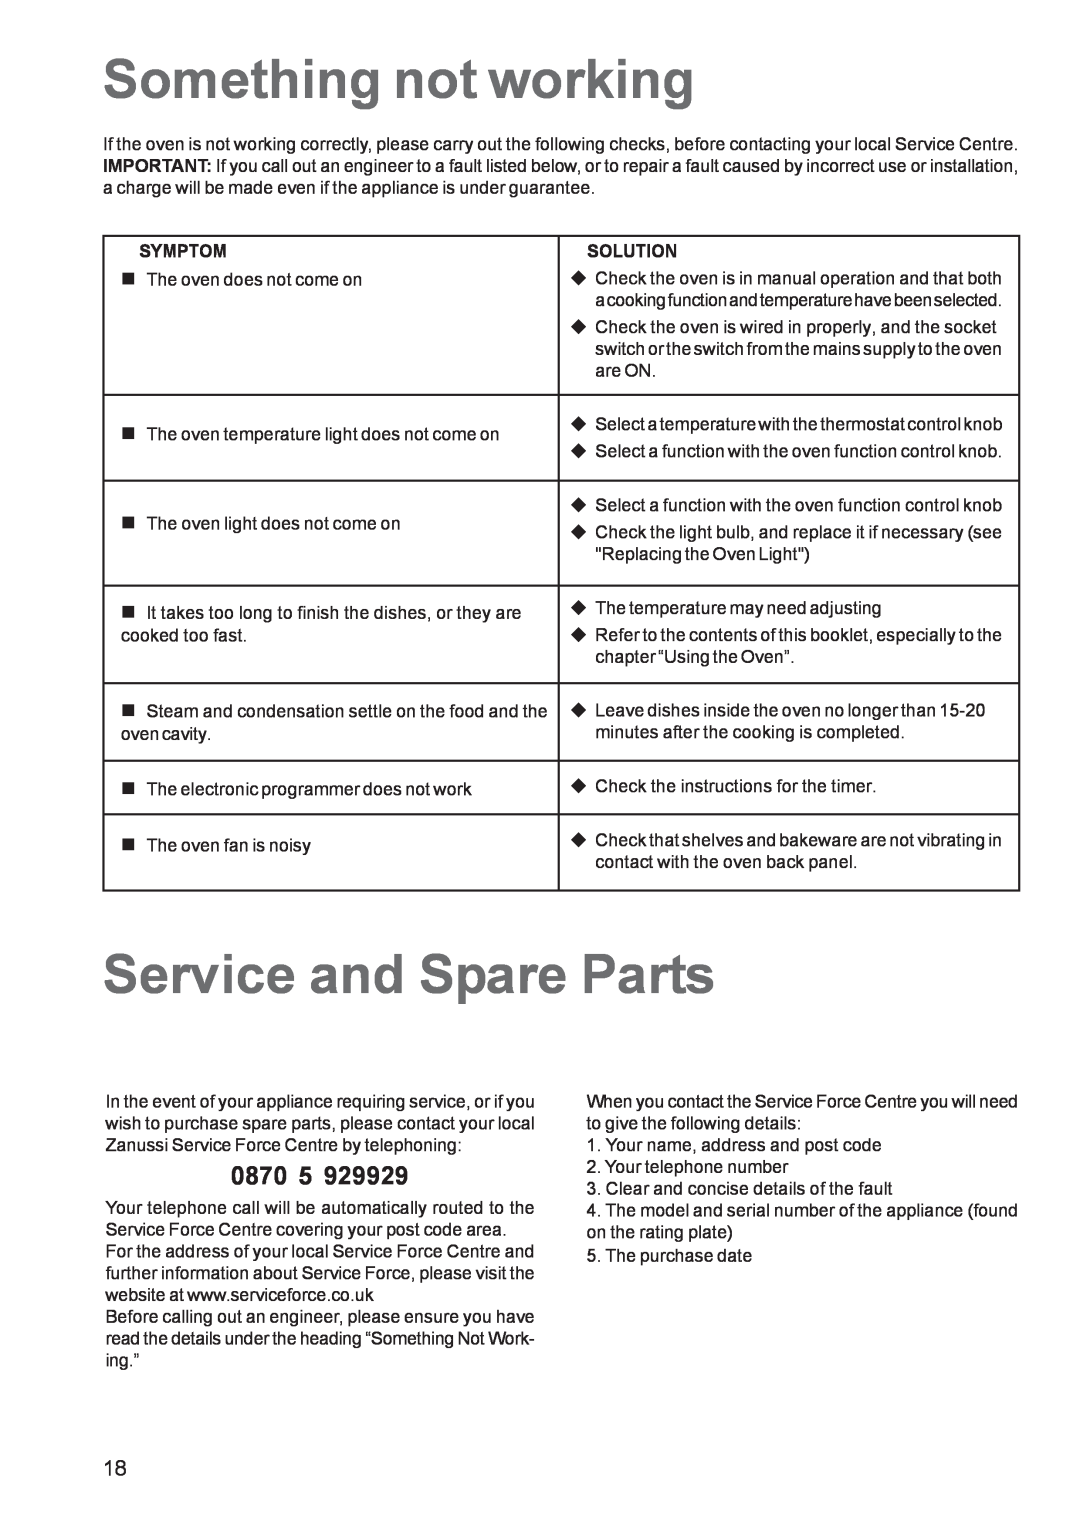 Zanussi ZBS 663 manual Something not working, Service and Spare Parts, 0870, Symptom, Solution 